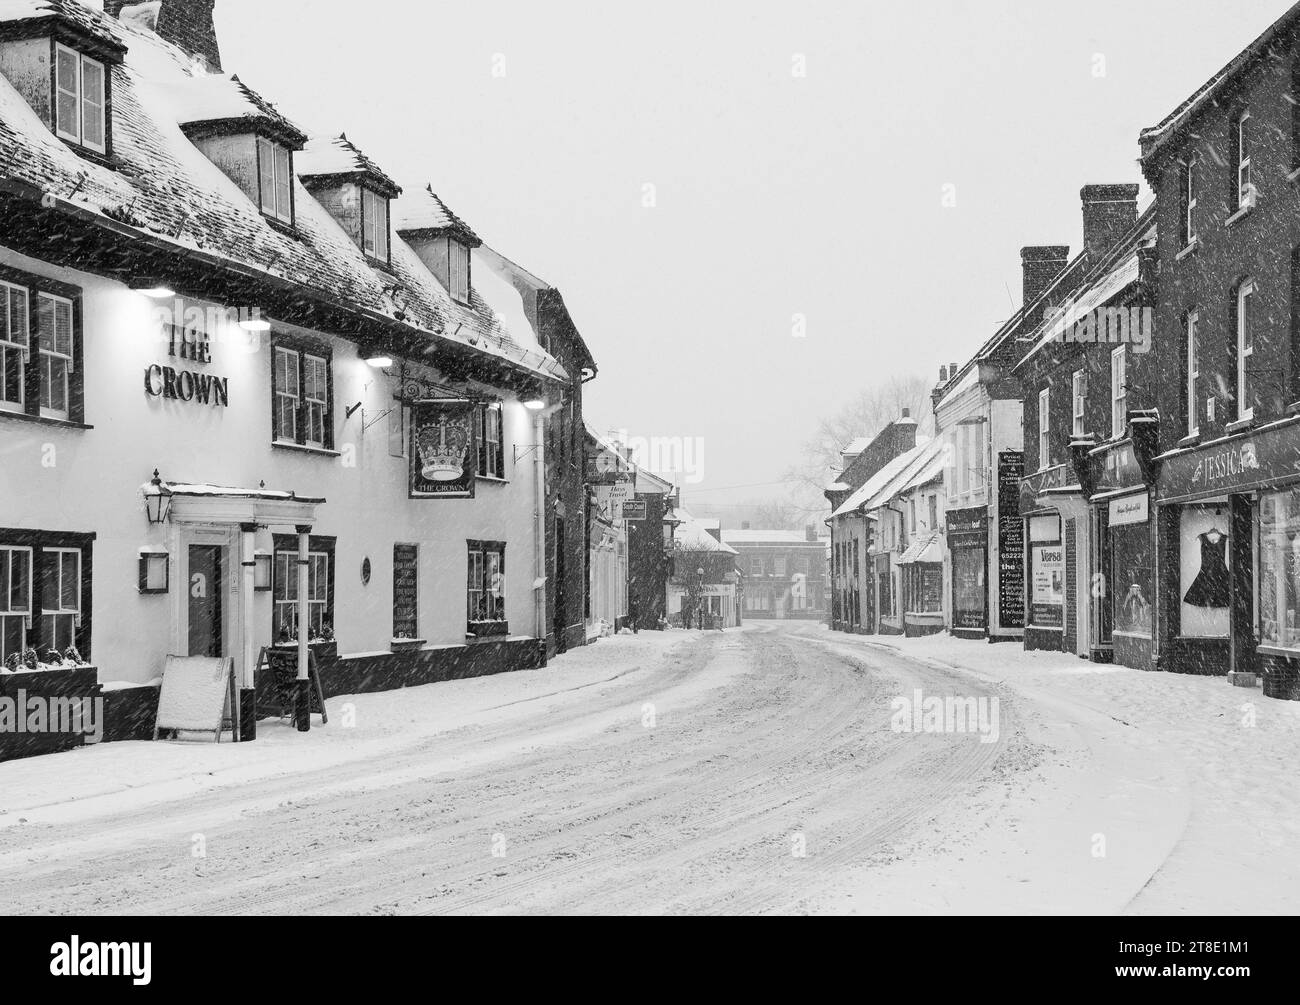 Falling snow on empty high street during 'Beast From The East' snowfall weather event in winter / spring 2018, UK. Black and white. Stock Photo